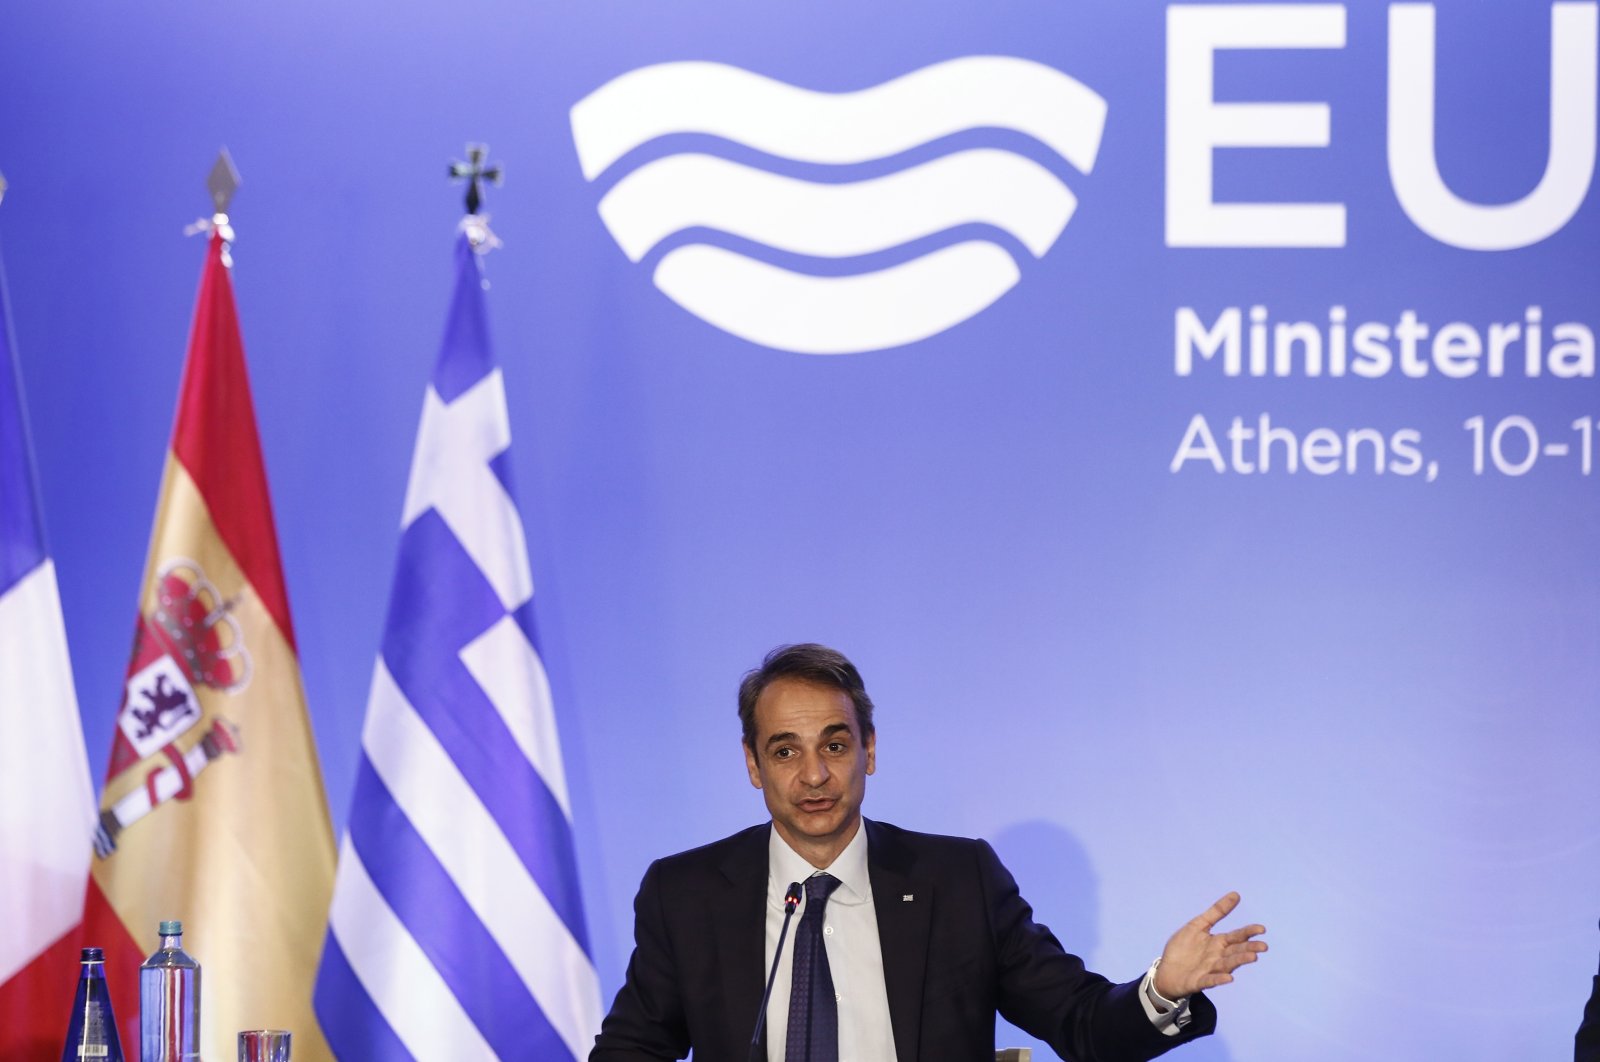 Greek Prime Minister Kyriakos Mitsotakis talks during a meeting of the Ministers of the EU Mediterranean countries (EU-Med7) in Athens, Greece, 11 June 2021. (EPA Photo)